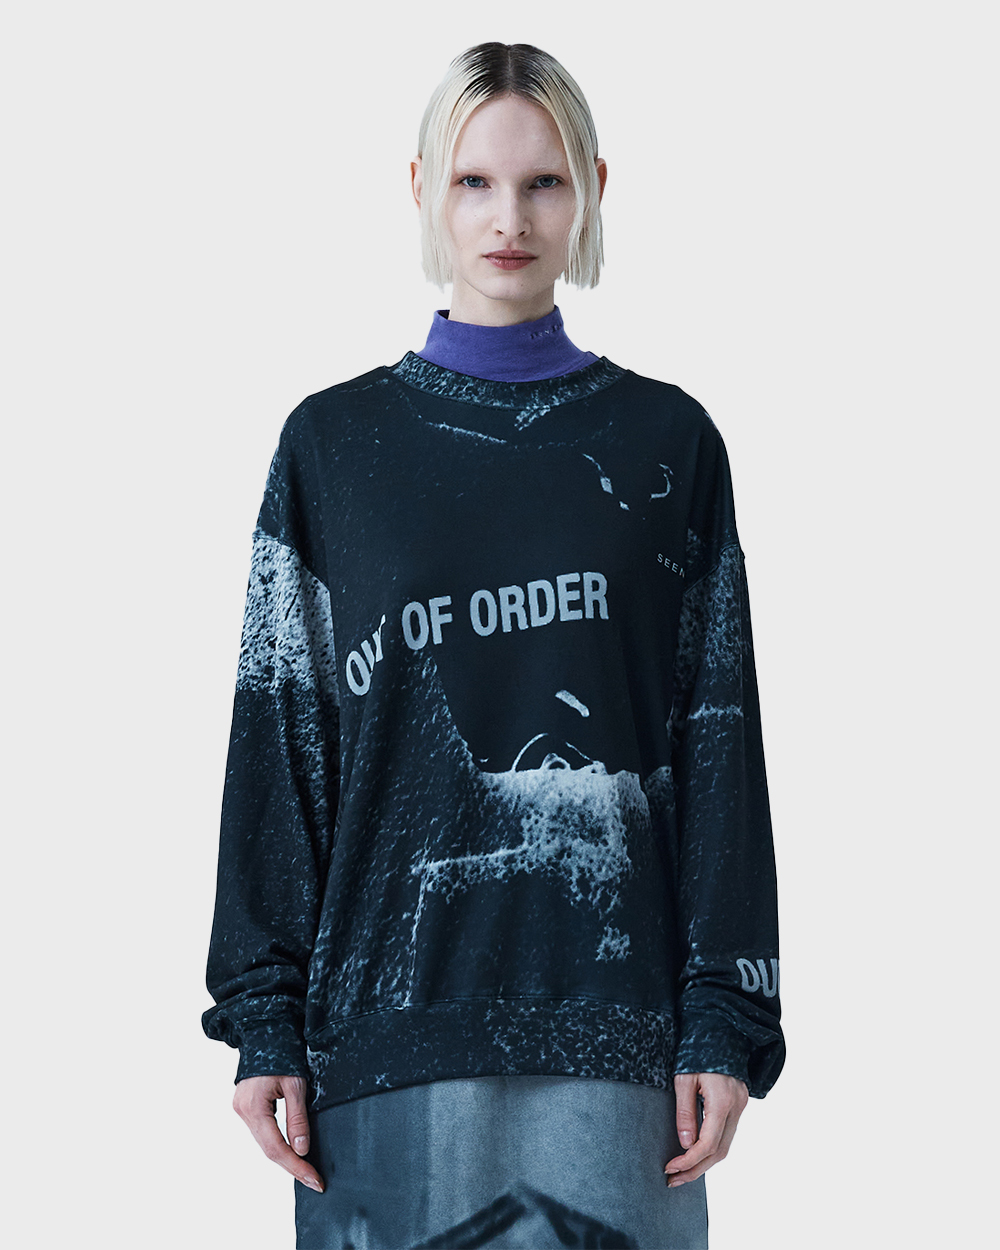 SEEN Out of order knit sweatshirts (Black)